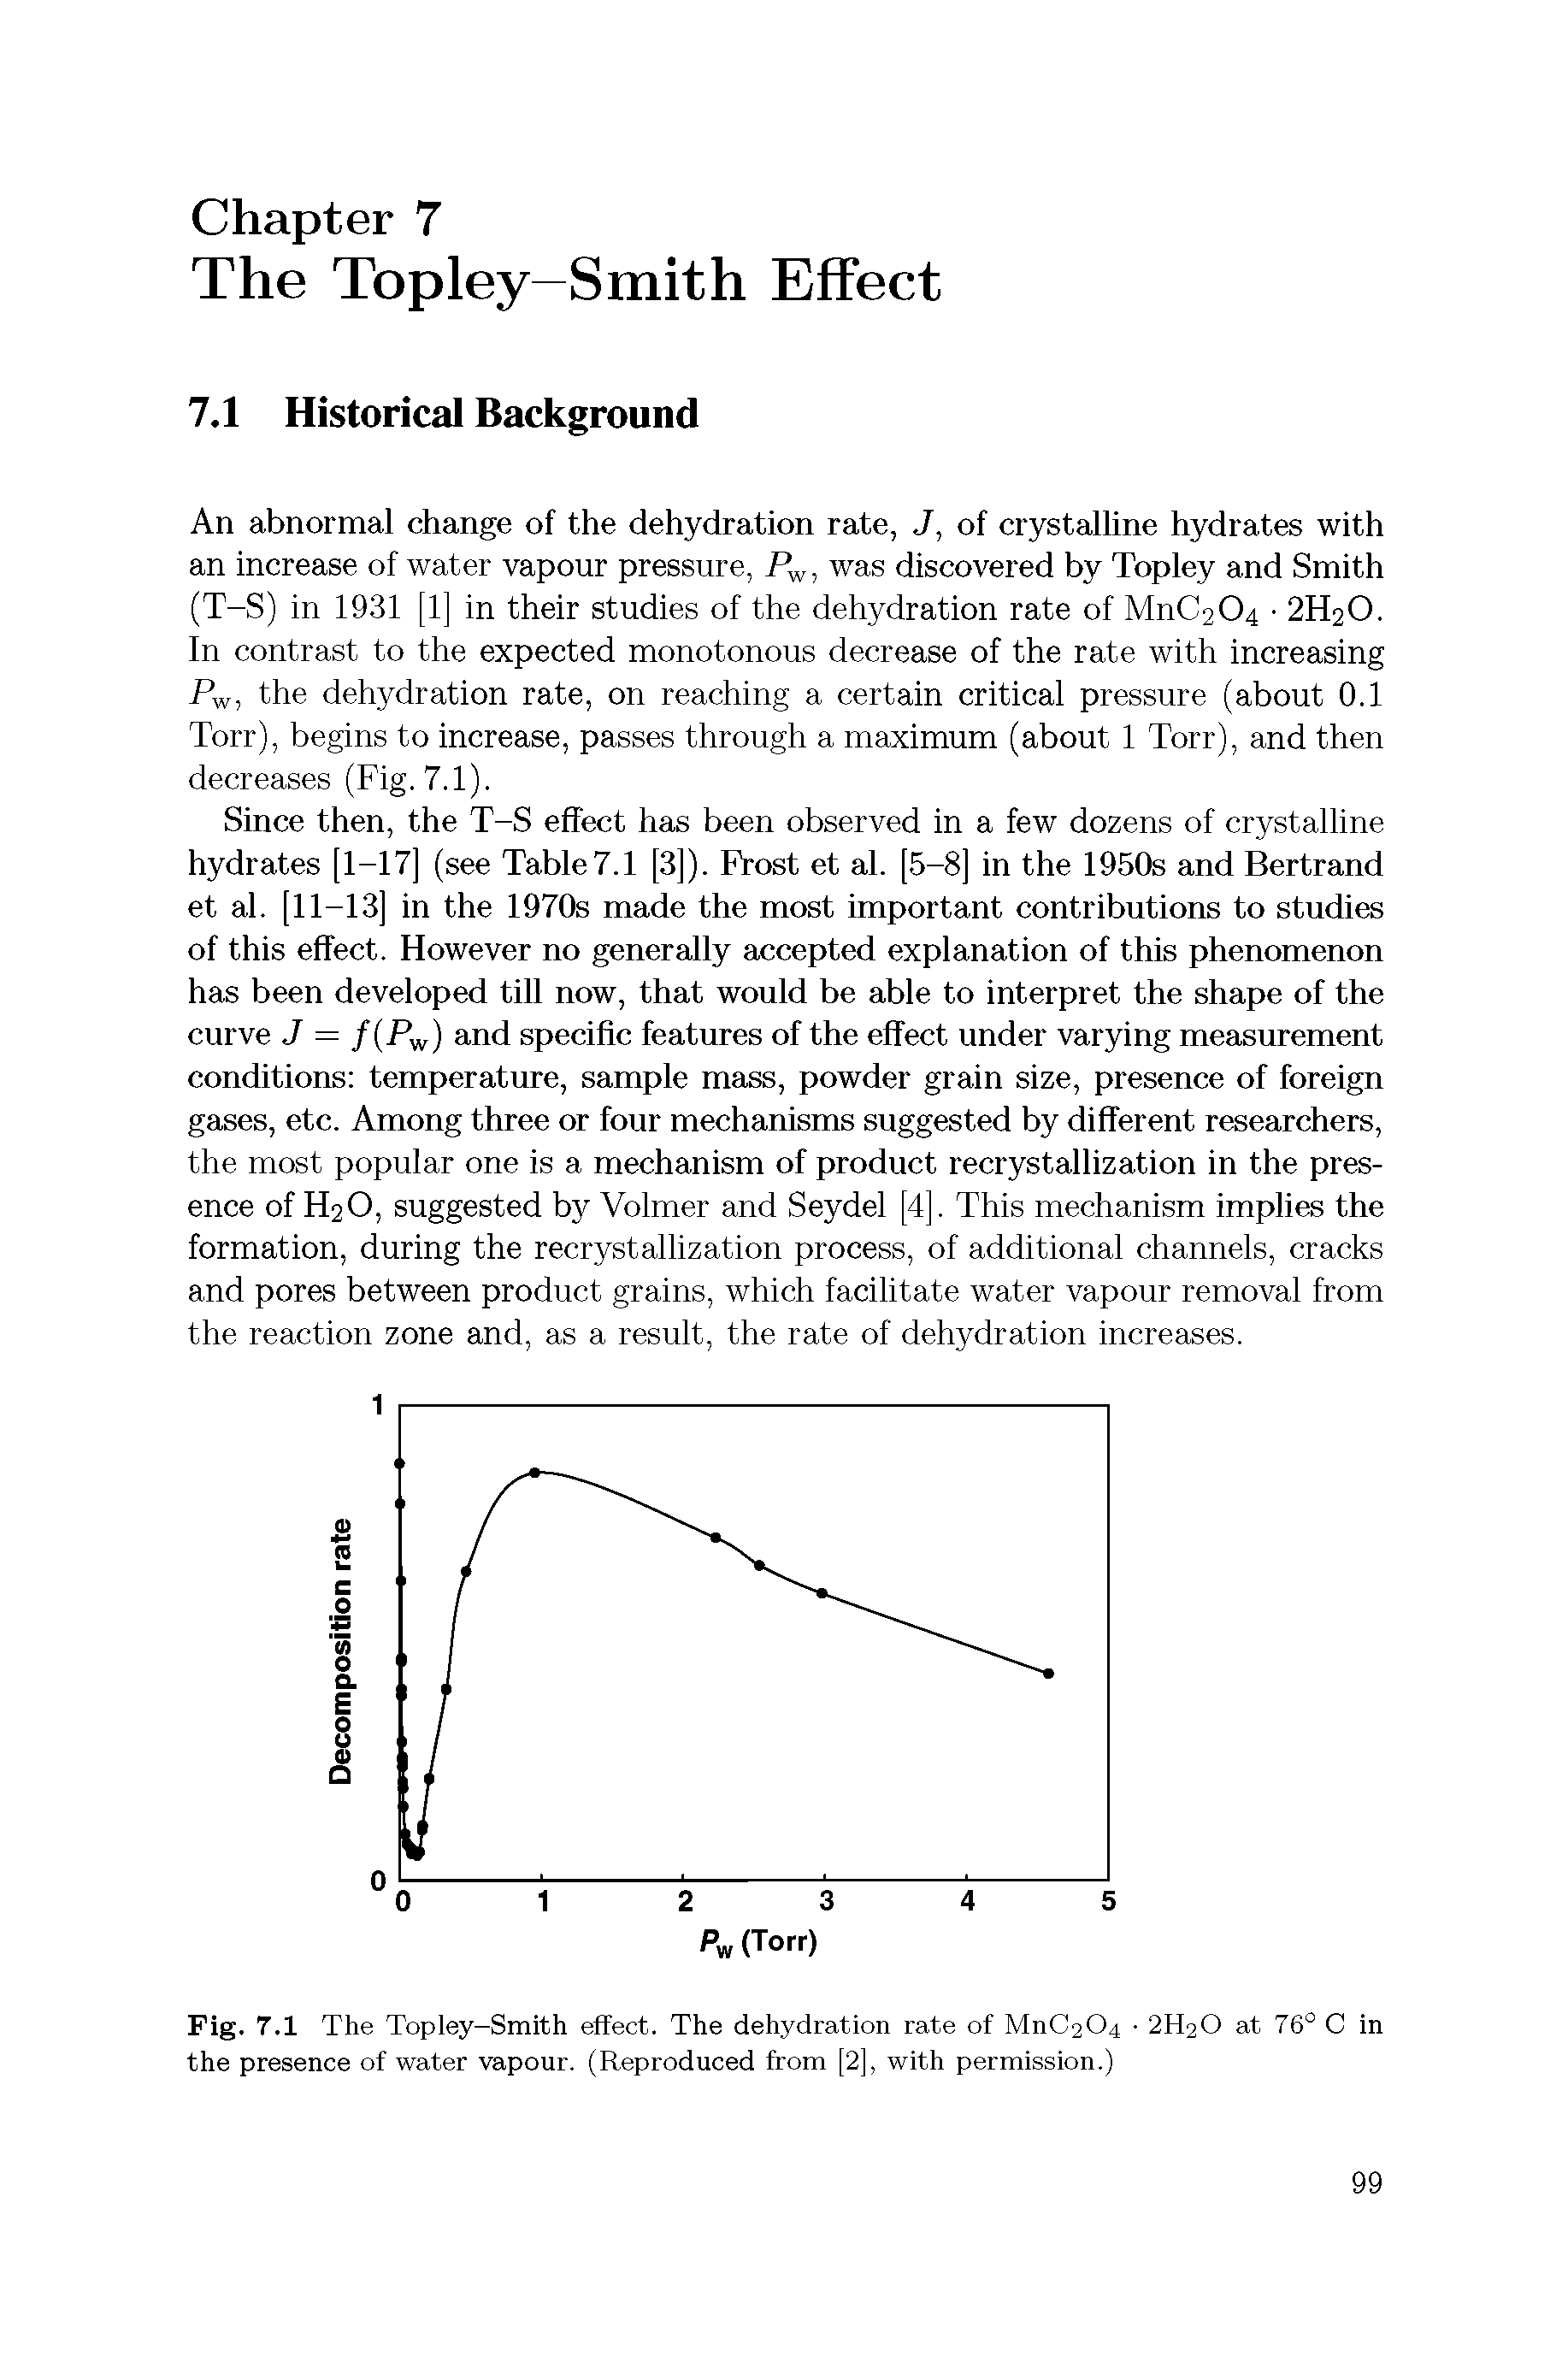 Fig. 7.1 The Topley-Smith effect. The dehydration rate of MnC204 2H2O at 76° C in the presence of water vapour. (Reproduced from [2], with permission.)...